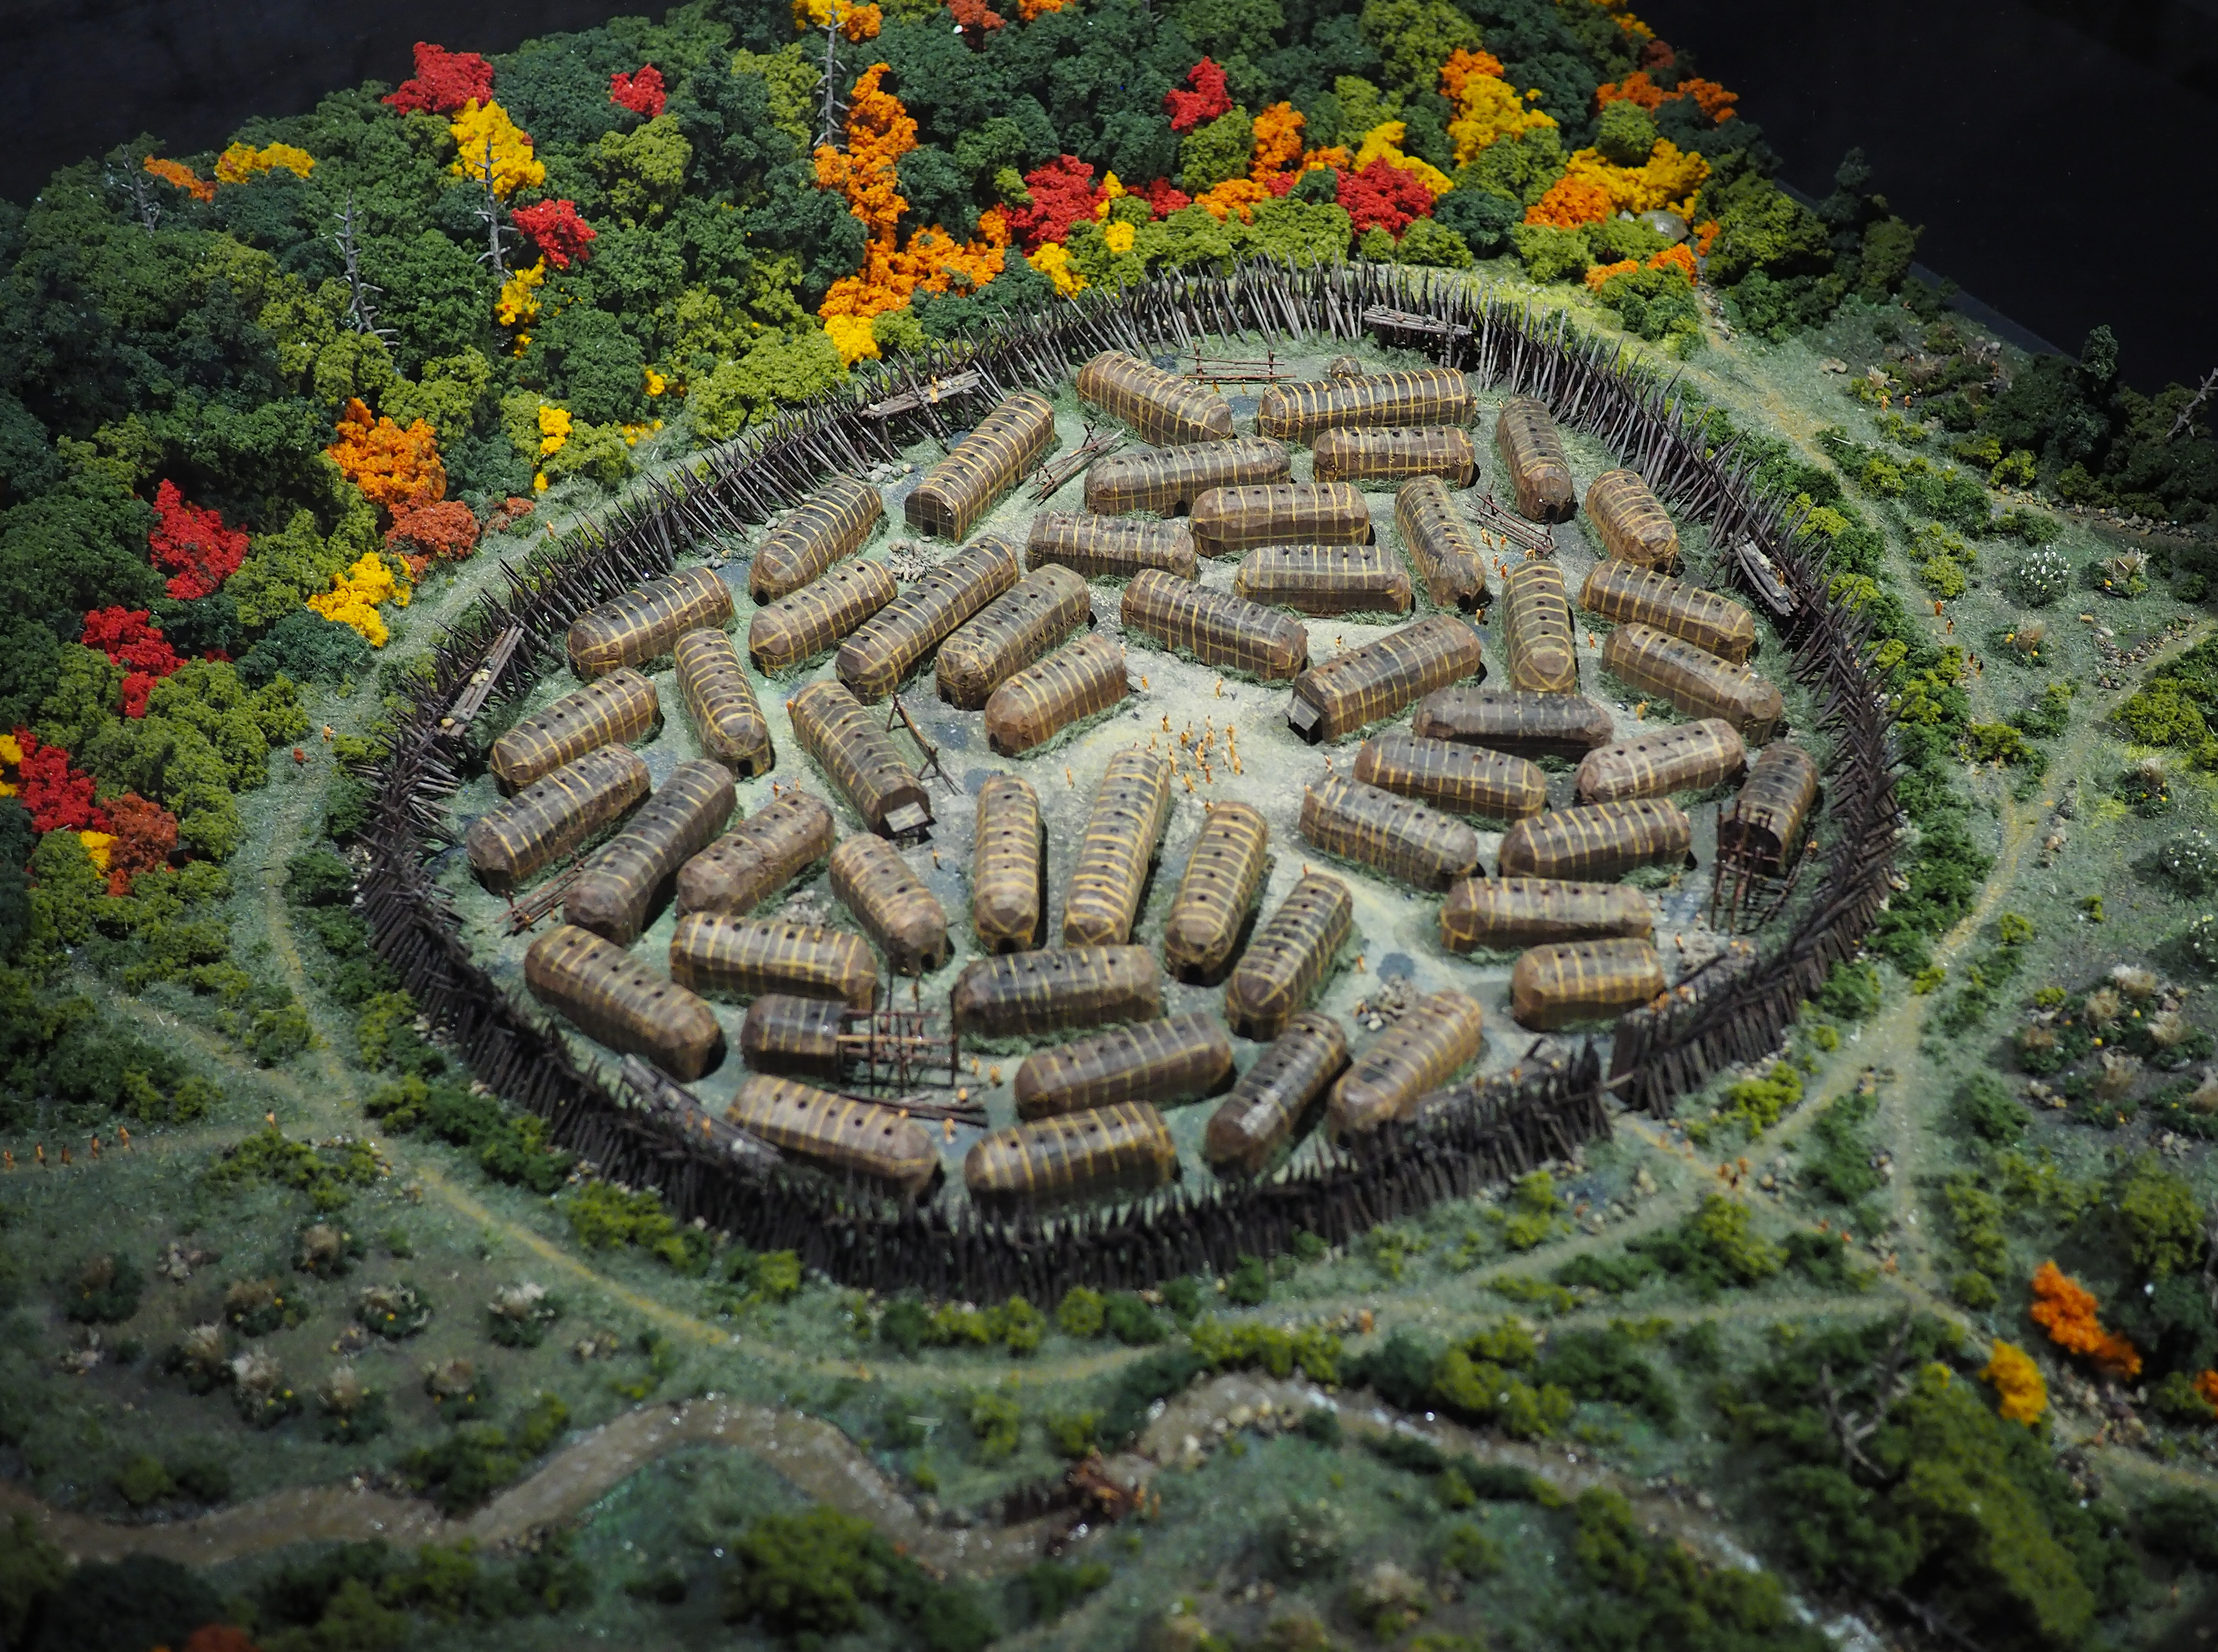 Model of the Iroquoian village of Hochelaga, from the descriptions of Jacques Cartier and other Quebec archaeological sites. Artist: Michel Cadieux. Photographed on January 6, 2018.